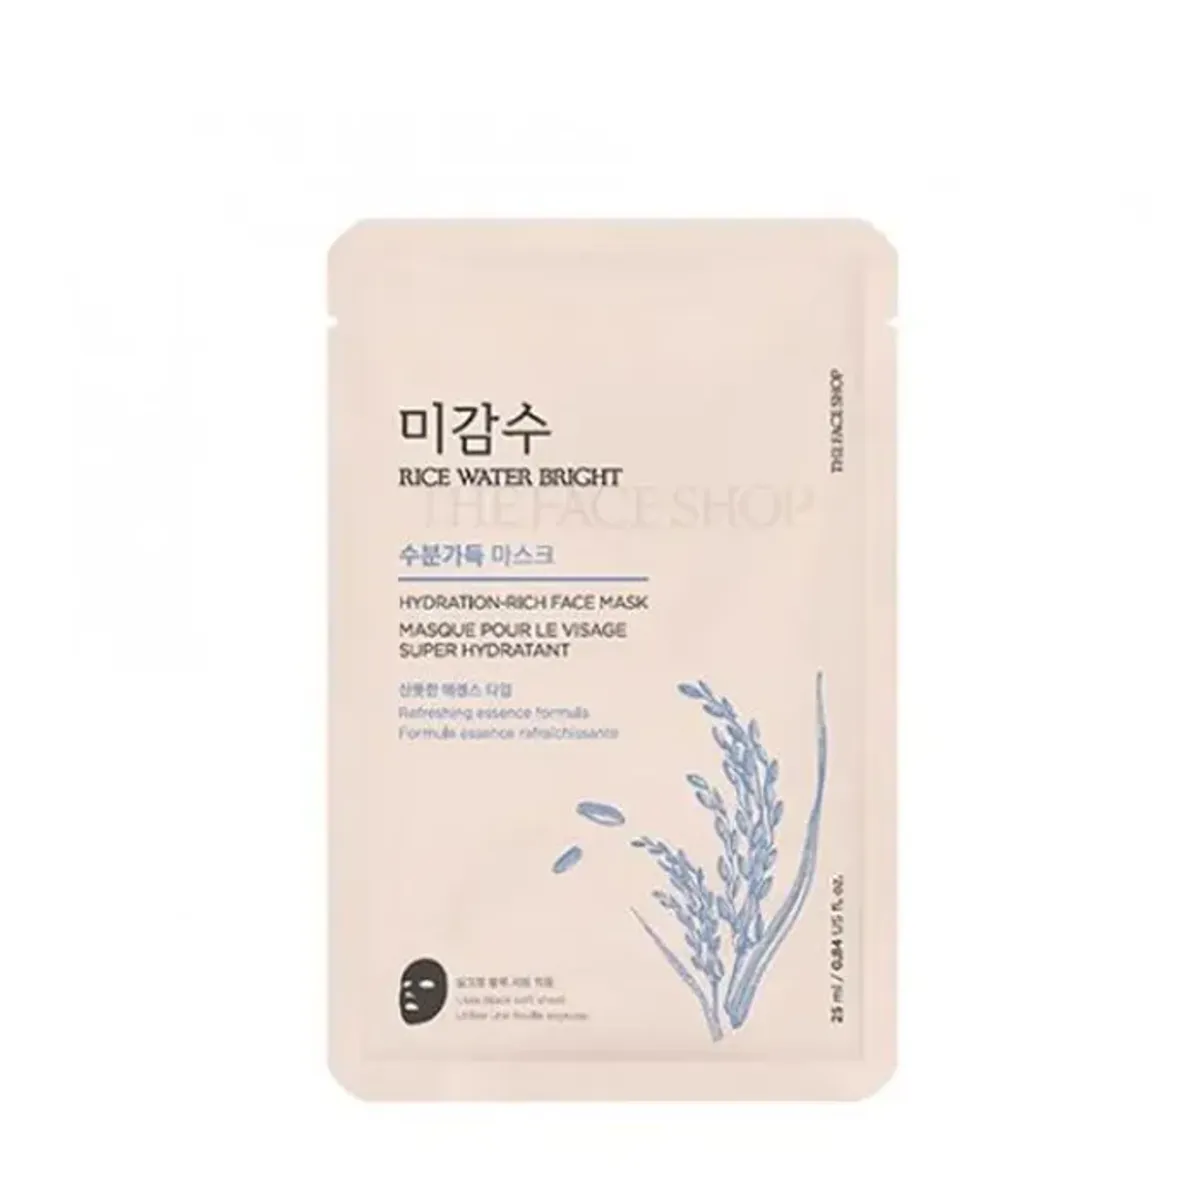 mat-na-duong-am-thanh-loc-da-thefaceshop-rice-water-bright-hydration-rich-mask-25ml-1